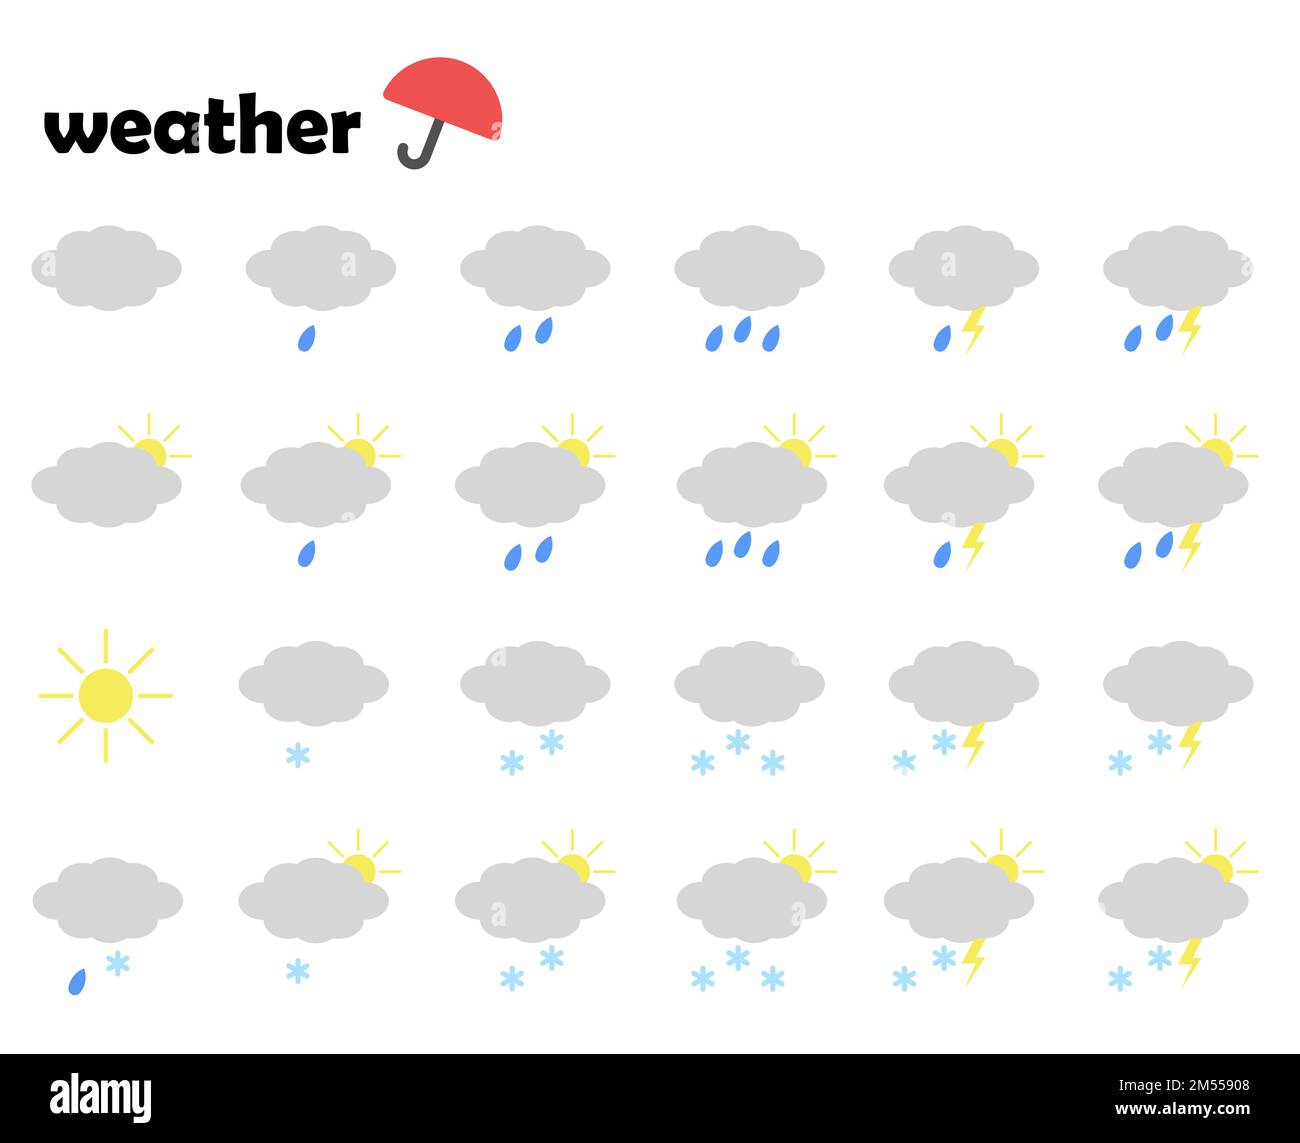 Symbols in the form of clouds, sun, lightning, rain, snow. A blank for the weather forecast. Stock Vector